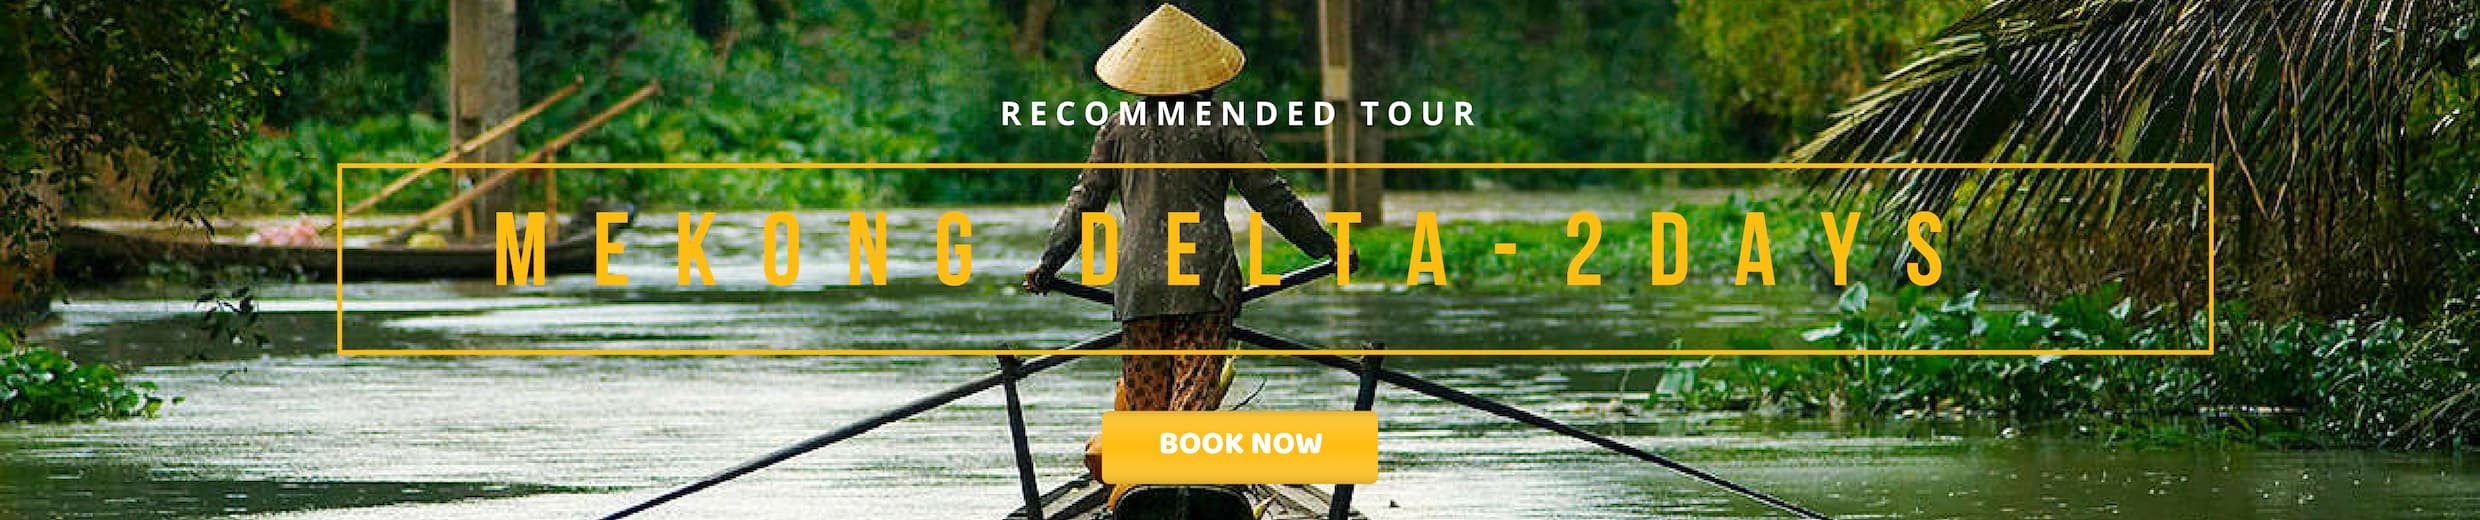 mekong delta Tour from Ho Chi Minh City